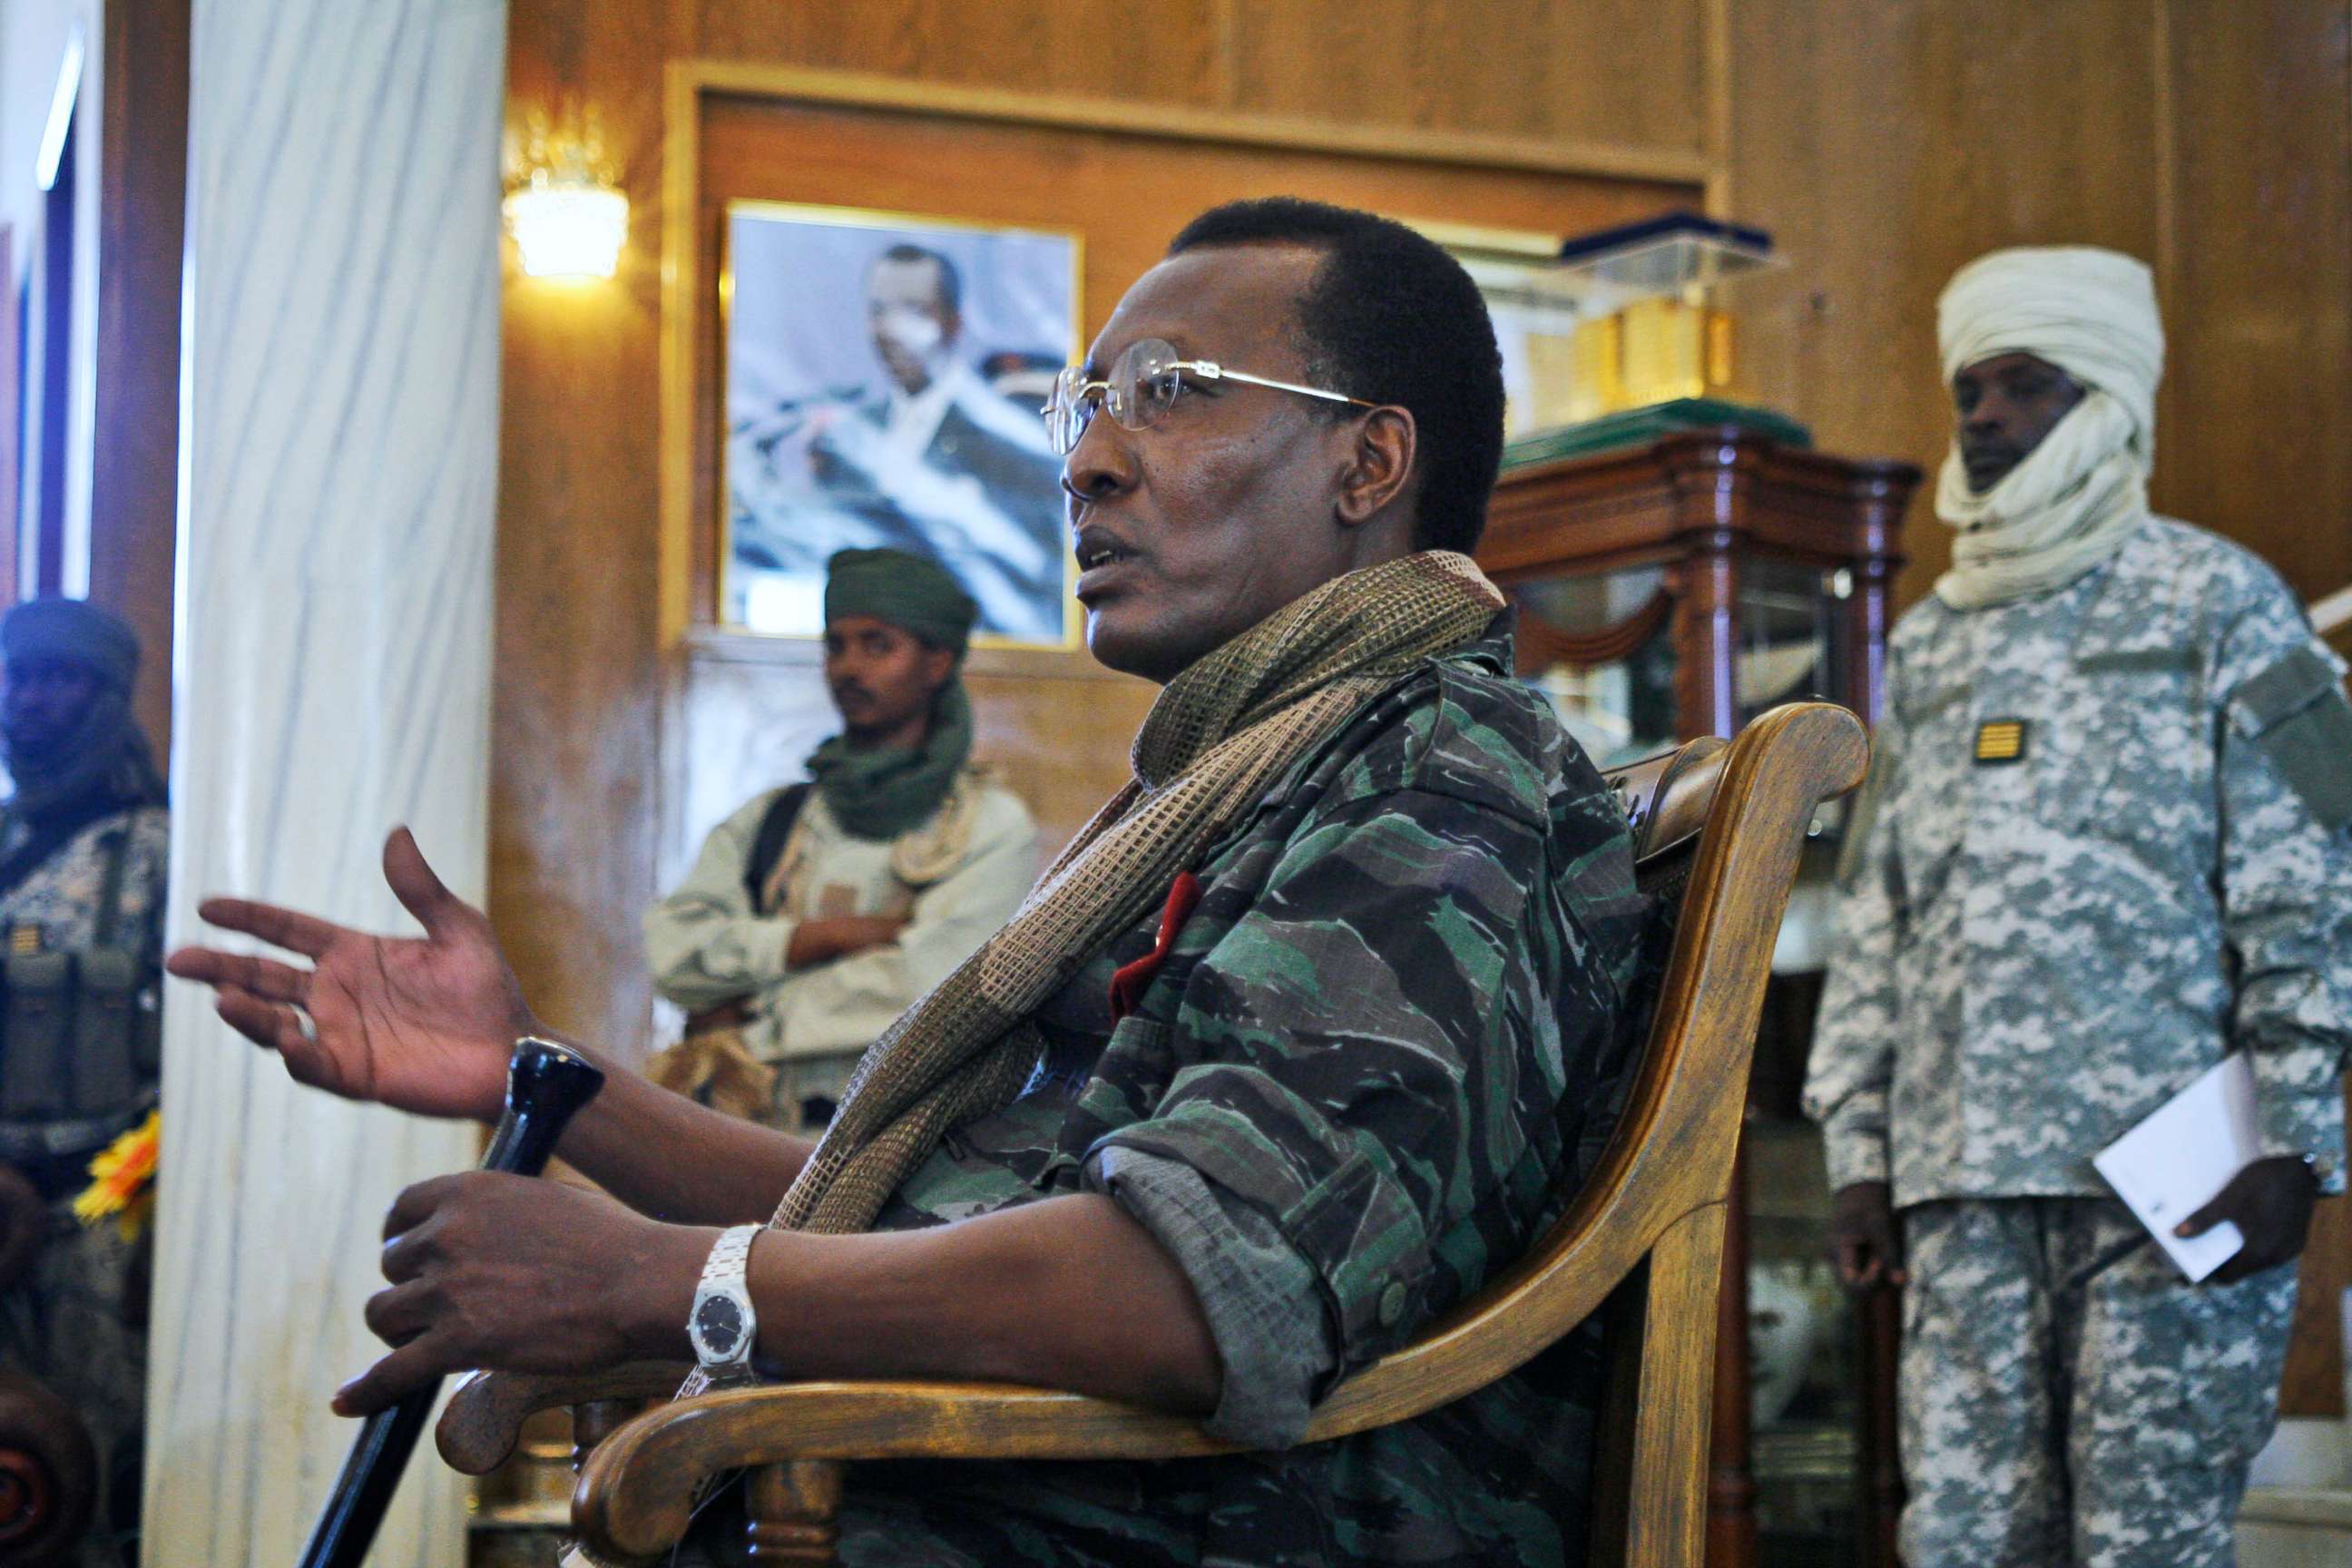 PHOTO: Chadian President Idriss Deby Itno addresses a news conference at the Presidential Palace in N'Djamena, Chad, Feb. 6, 2008.